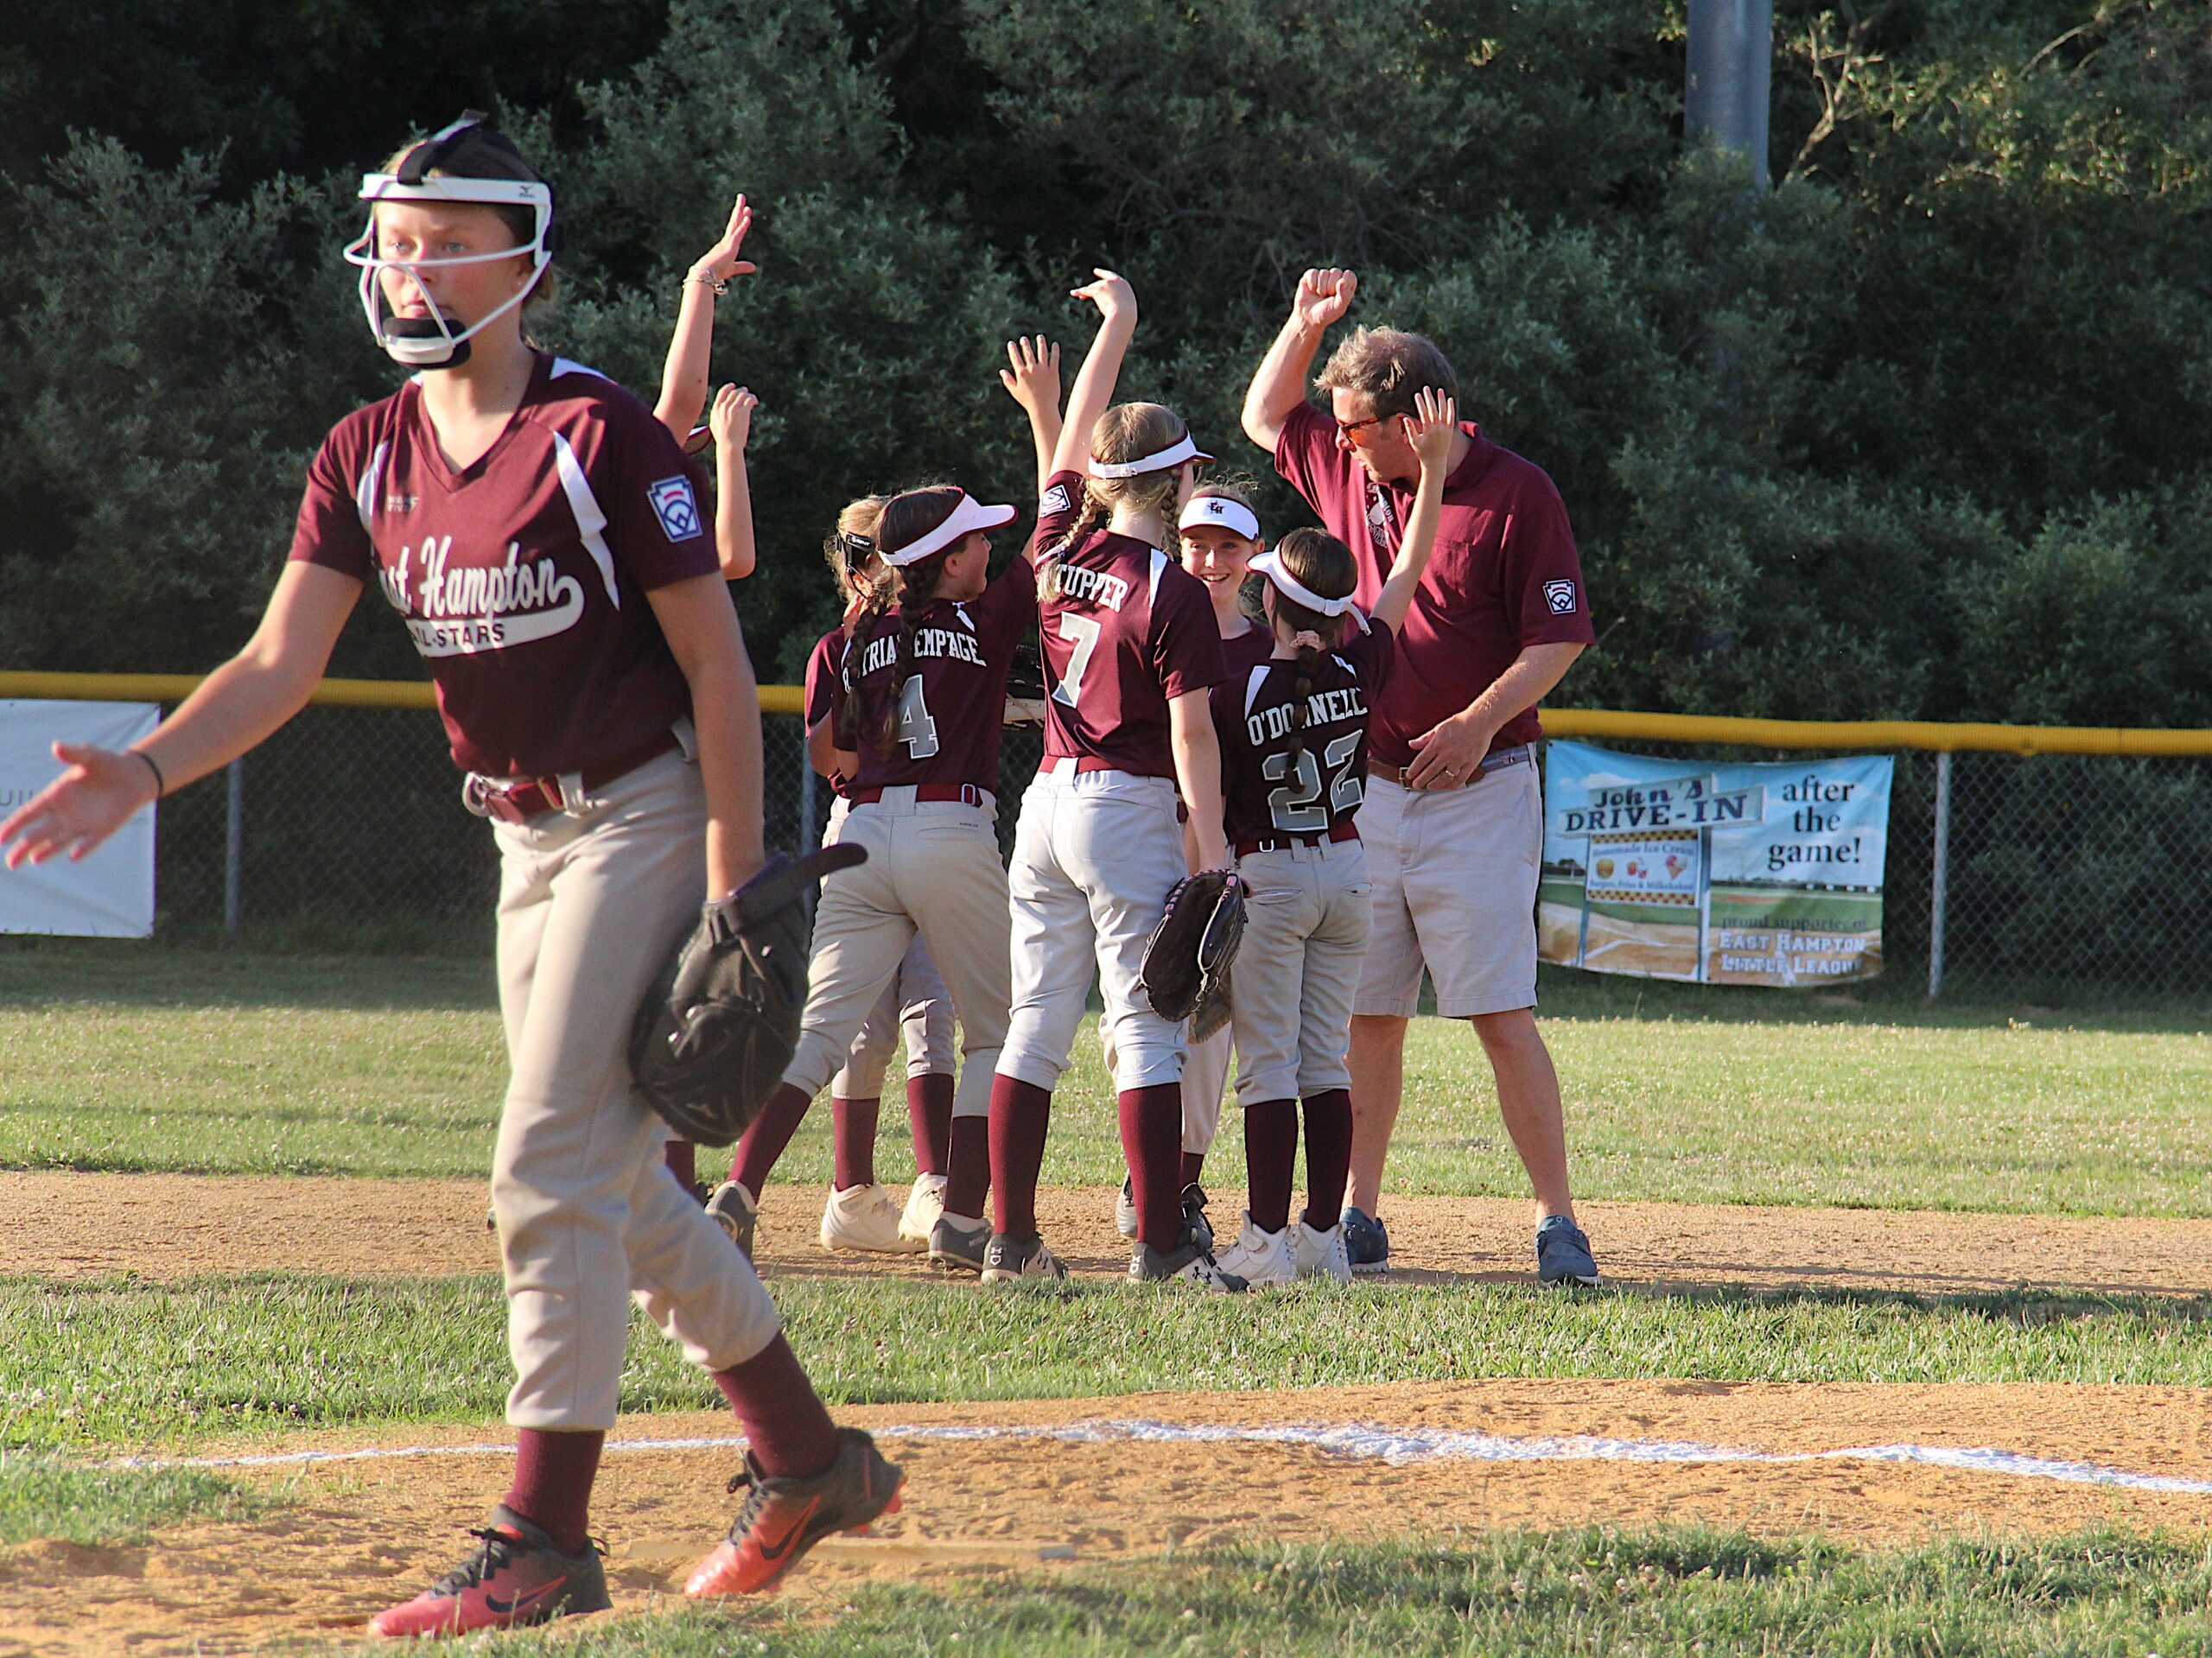 The East Hampton Minors softball All-Stars defeated North Shore Little League, 22-15, in game one of the District 36 Championships at Pantigo Field on July 6, but then lost the second game two days later, allowing North Shore to claim the district title.  KYRIL BROMLEY